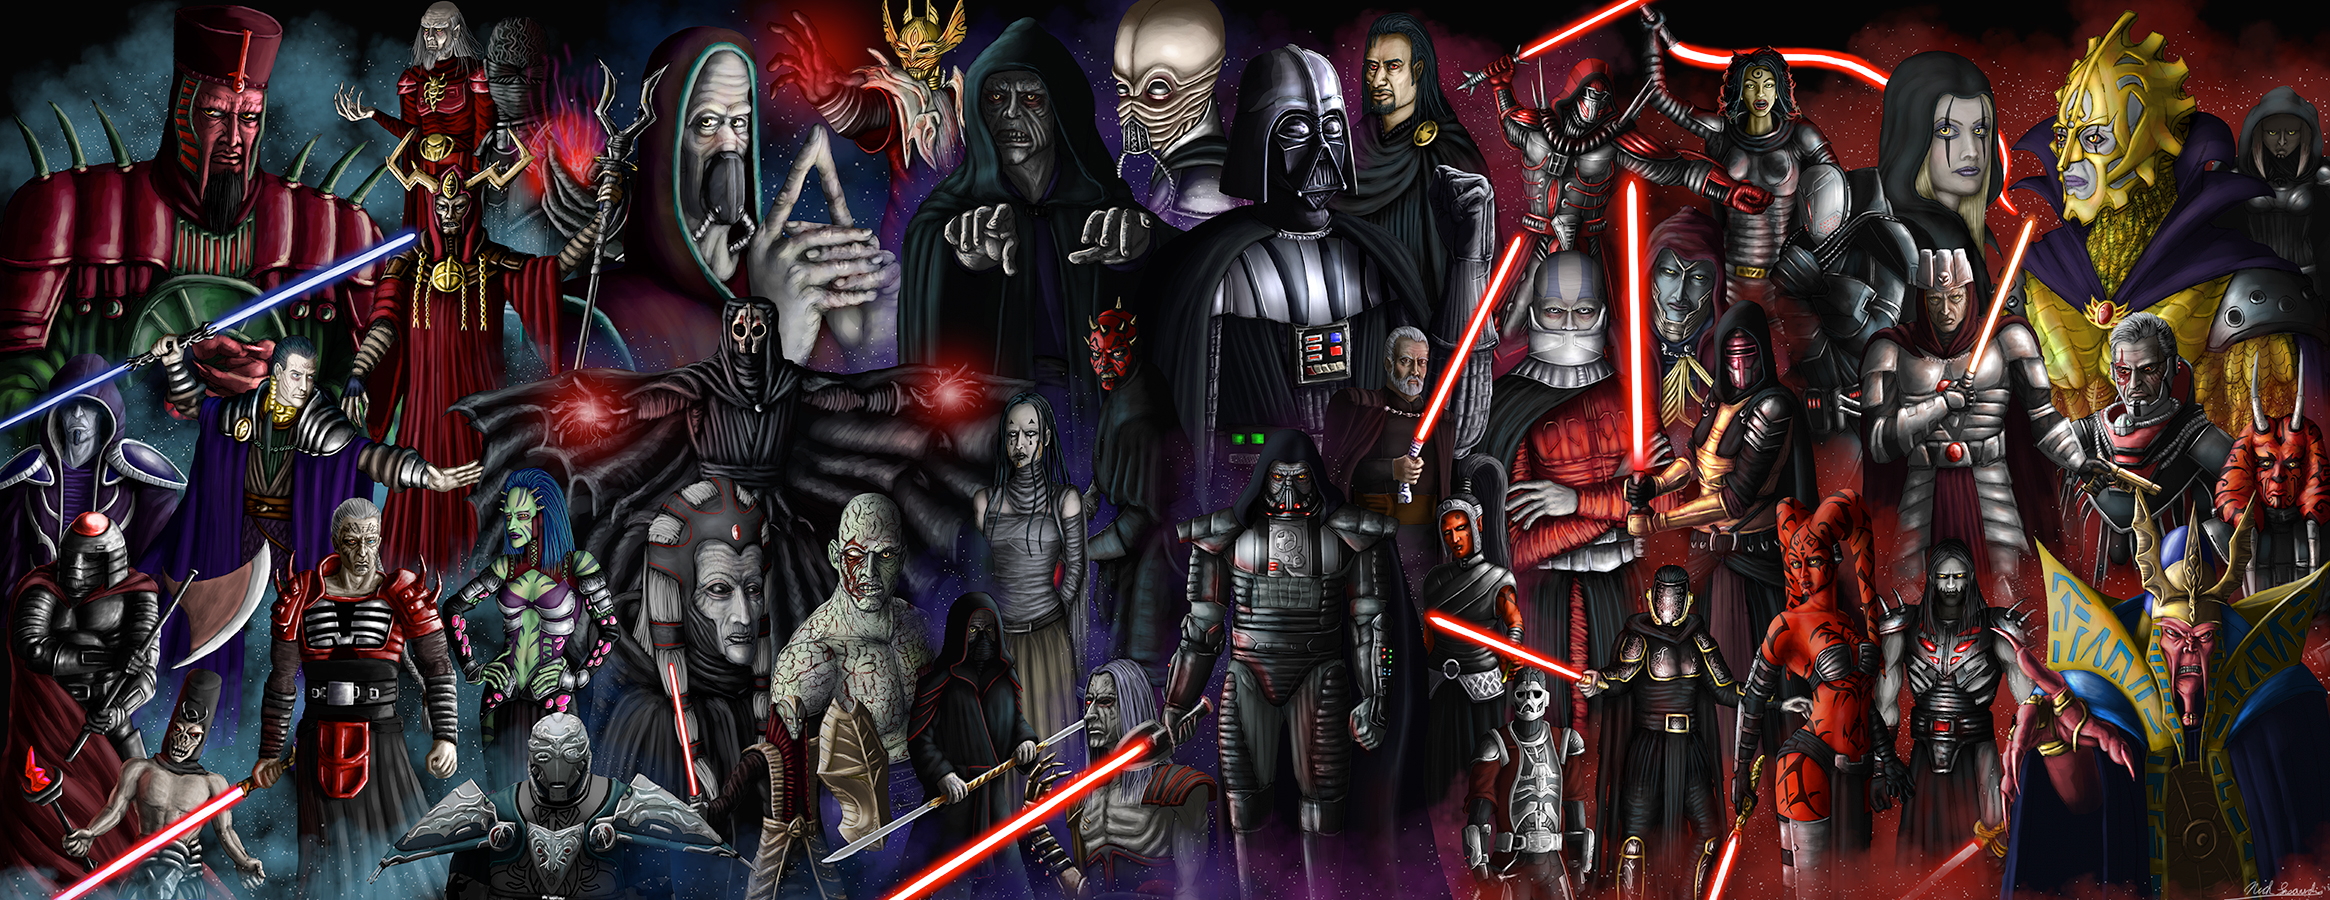 Sith Lords Wallpaper The sith lords by mr 2330x900